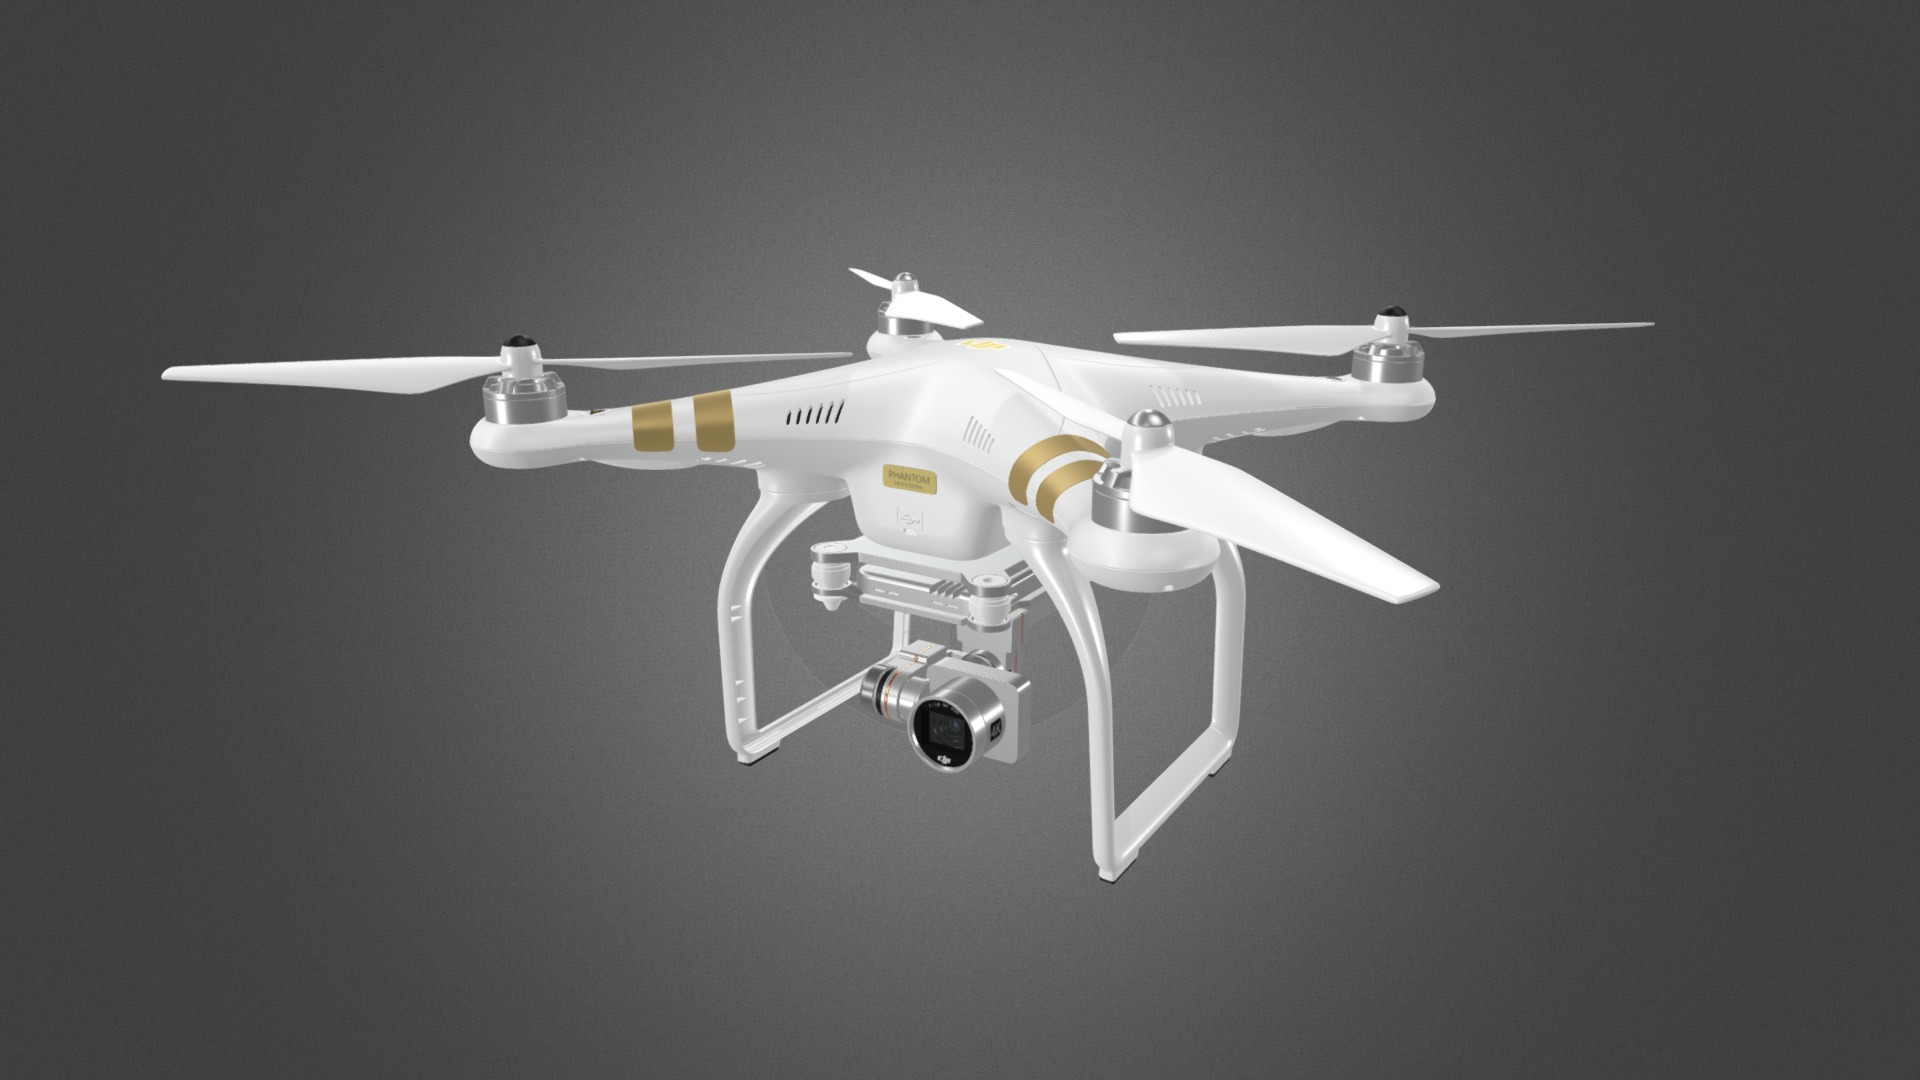 3D model DJI Phantom 3 Pro - This is a 3D model of the DJI Phantom 3 Pro. The 3D model is about a drone flying in the air.